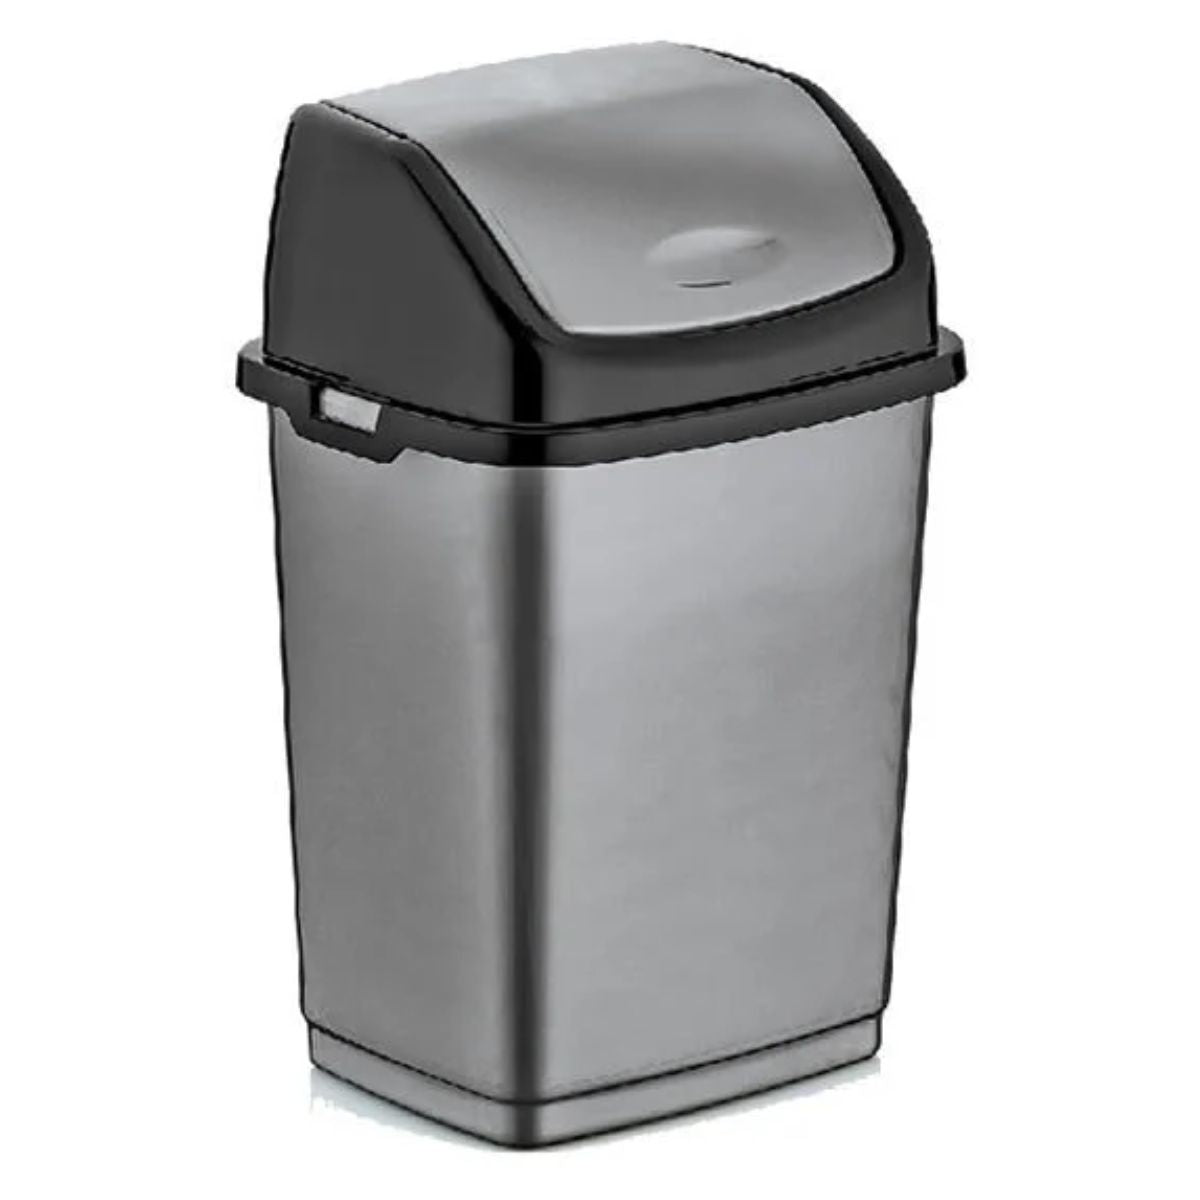 A Fantasy - Swing Top Plastic Bin - 10L with a black swing-top lid, set against a plain background.